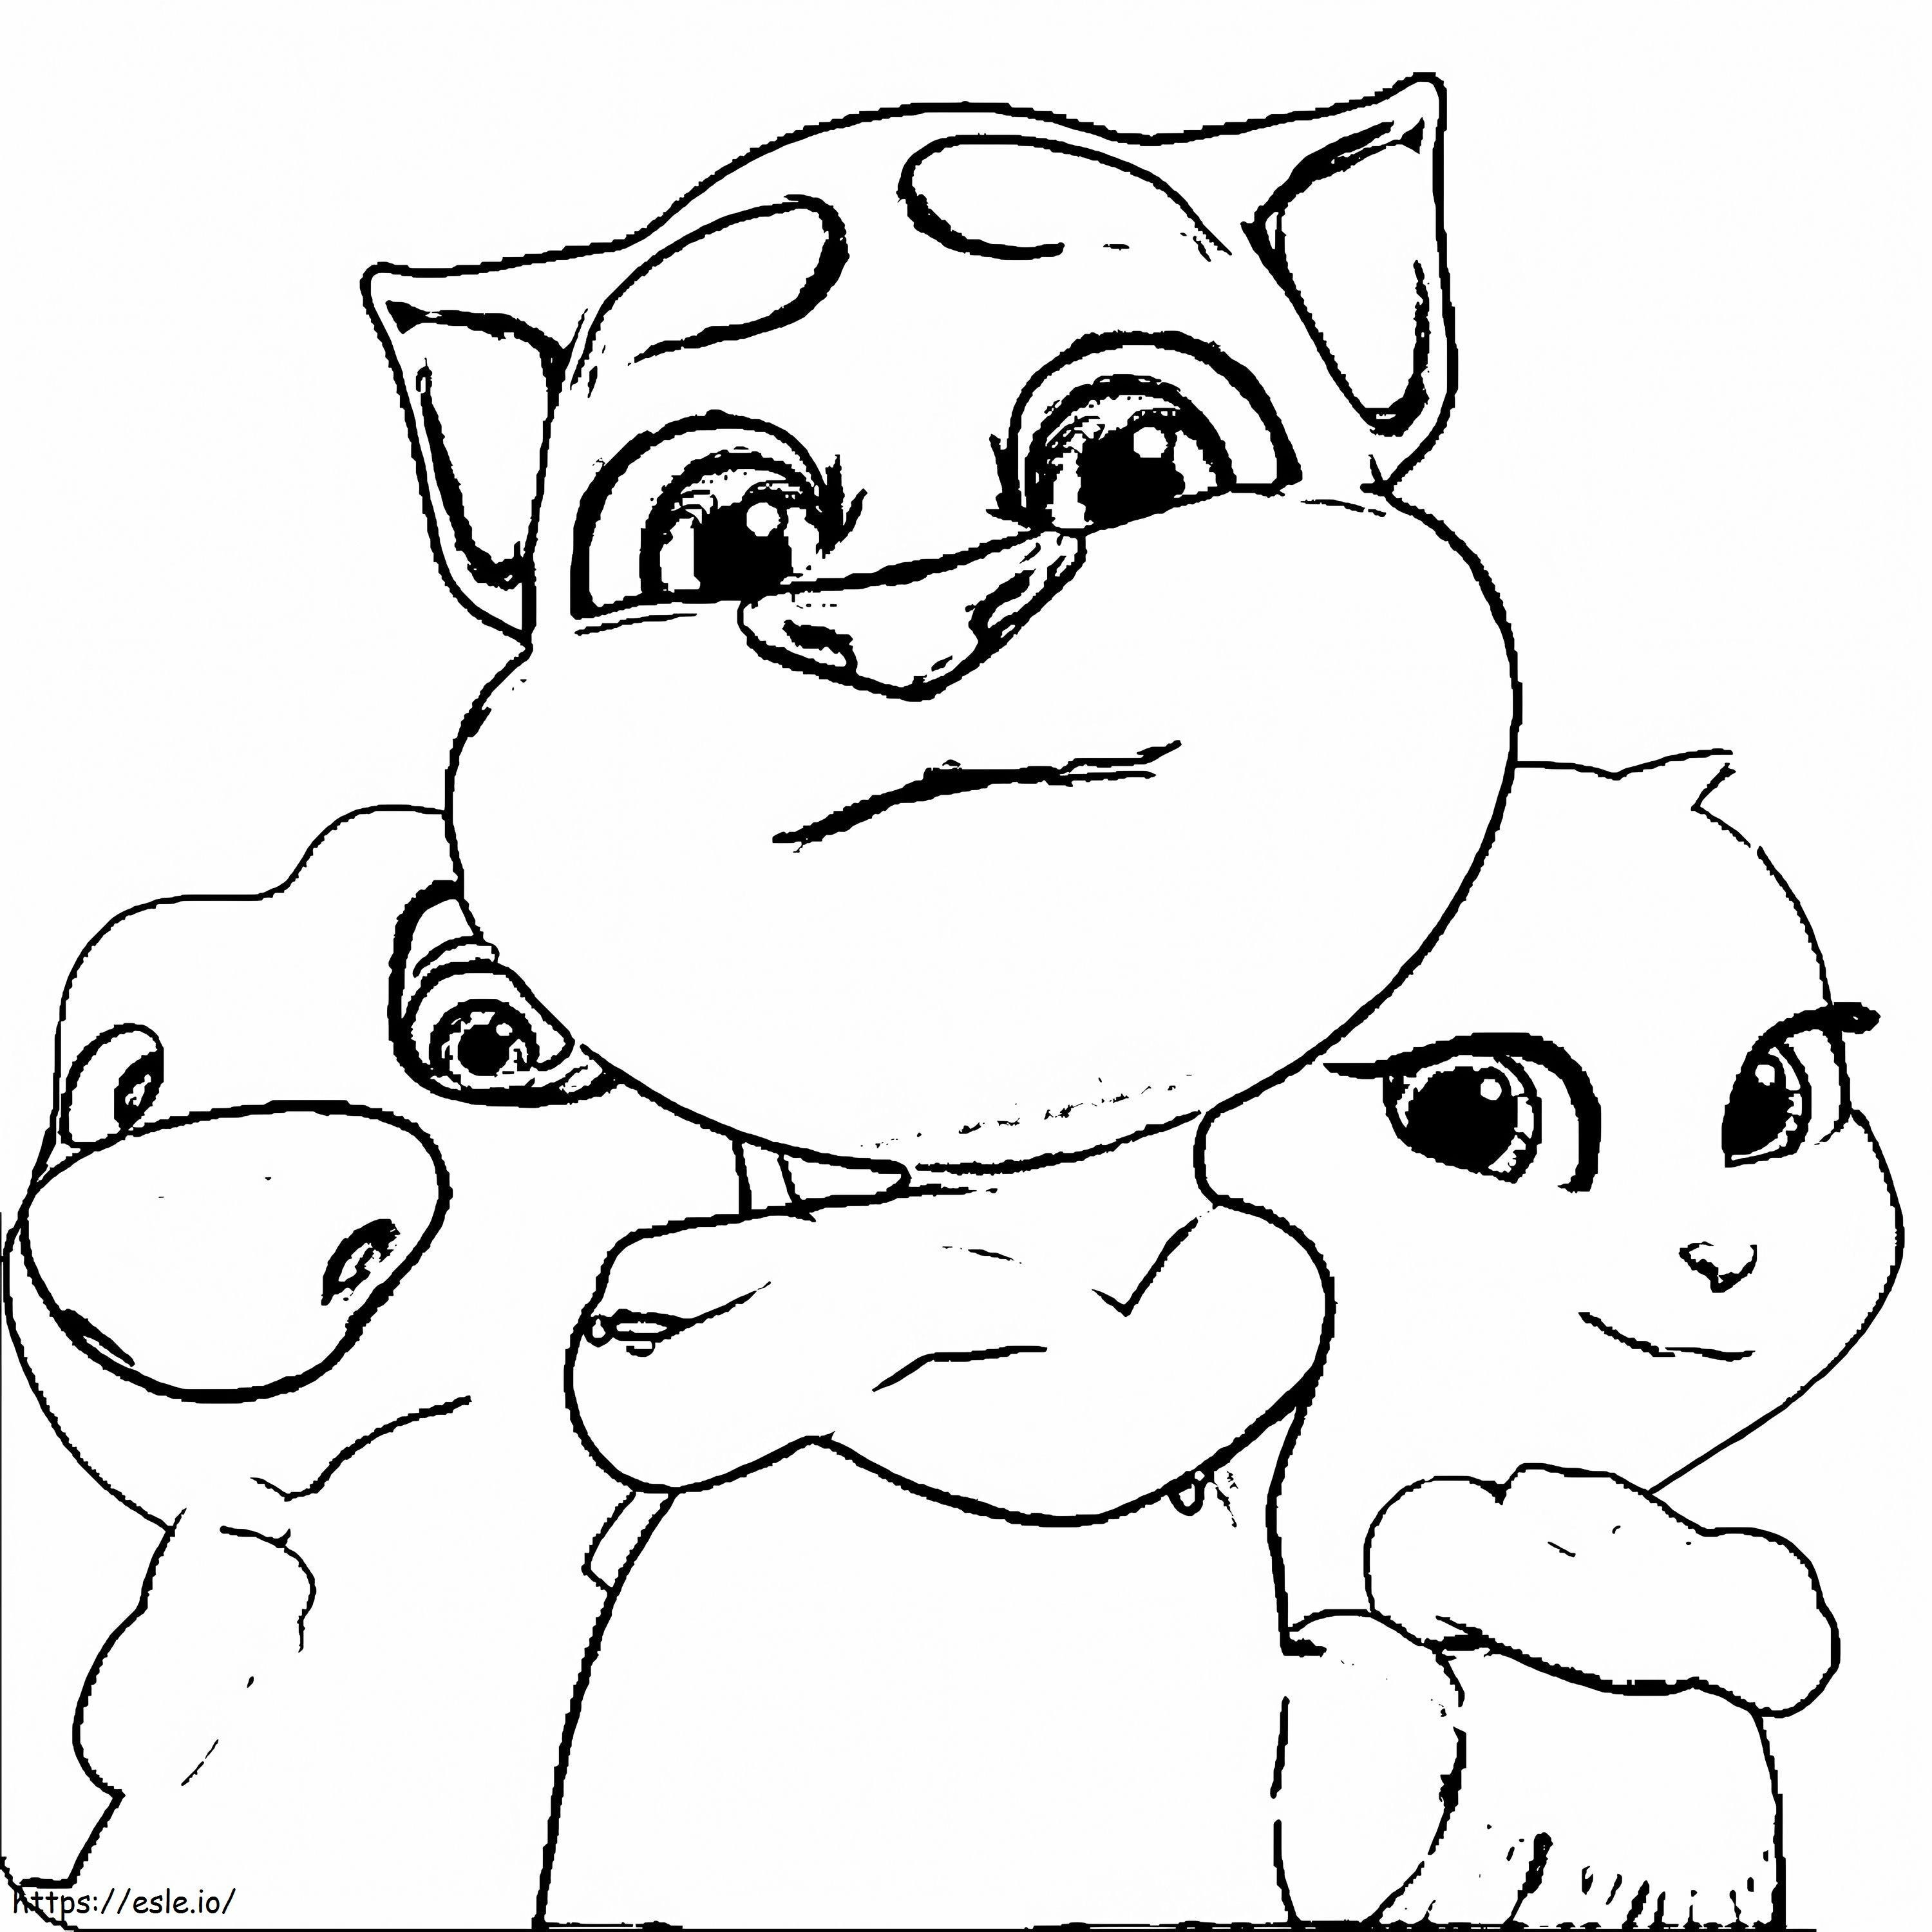 1539424403 Nixnbmb6T coloring page